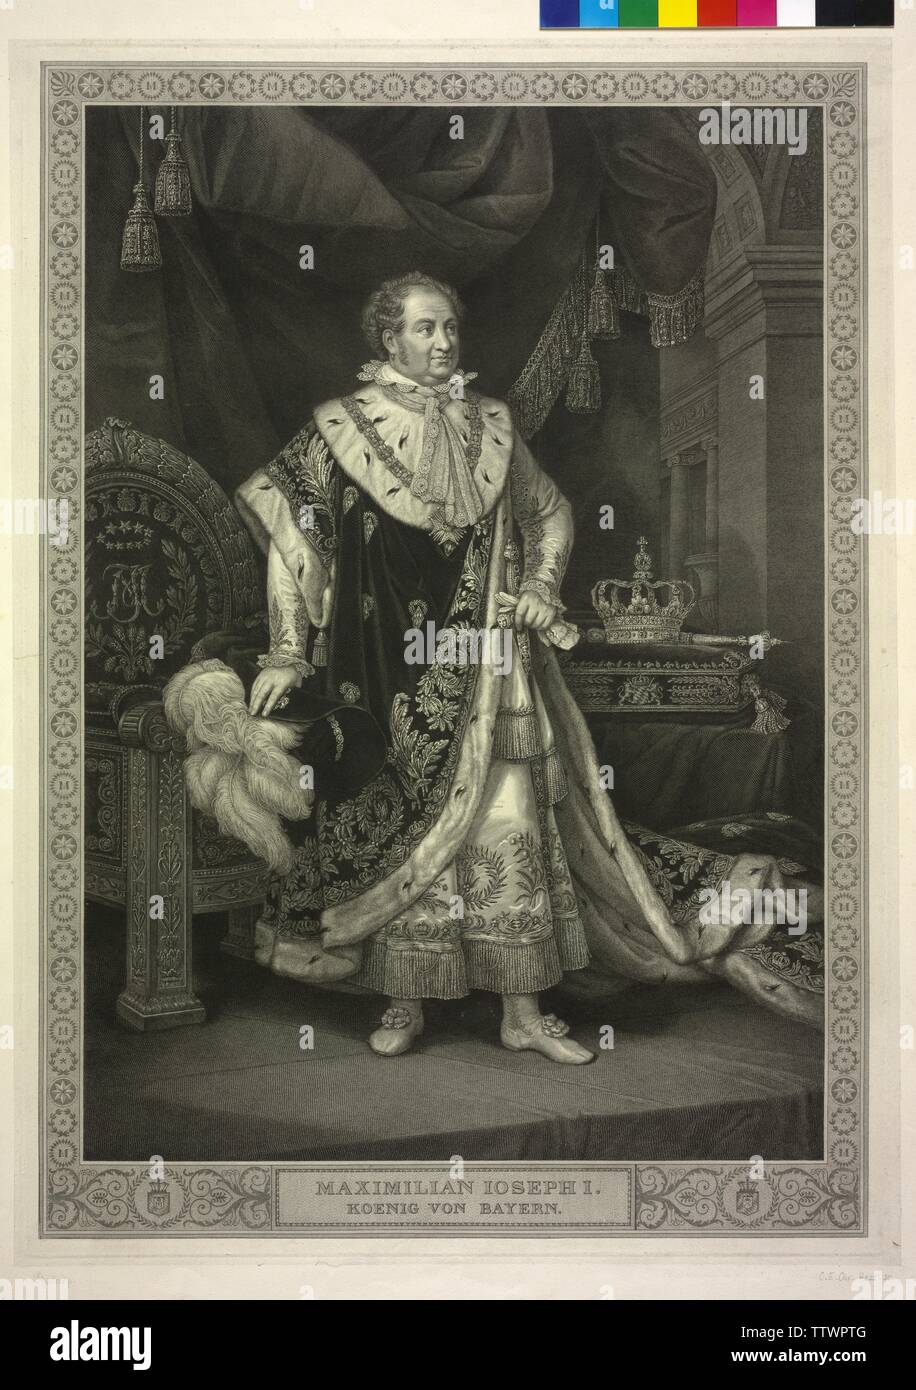 Maximilian Ioseph I King of Bavaria, etching by Karl Ernst Christoph Hess based on a painting by Joseph Karl Stieler, Additional-Rights-Clearance-Info-Not-Available Stock Photo